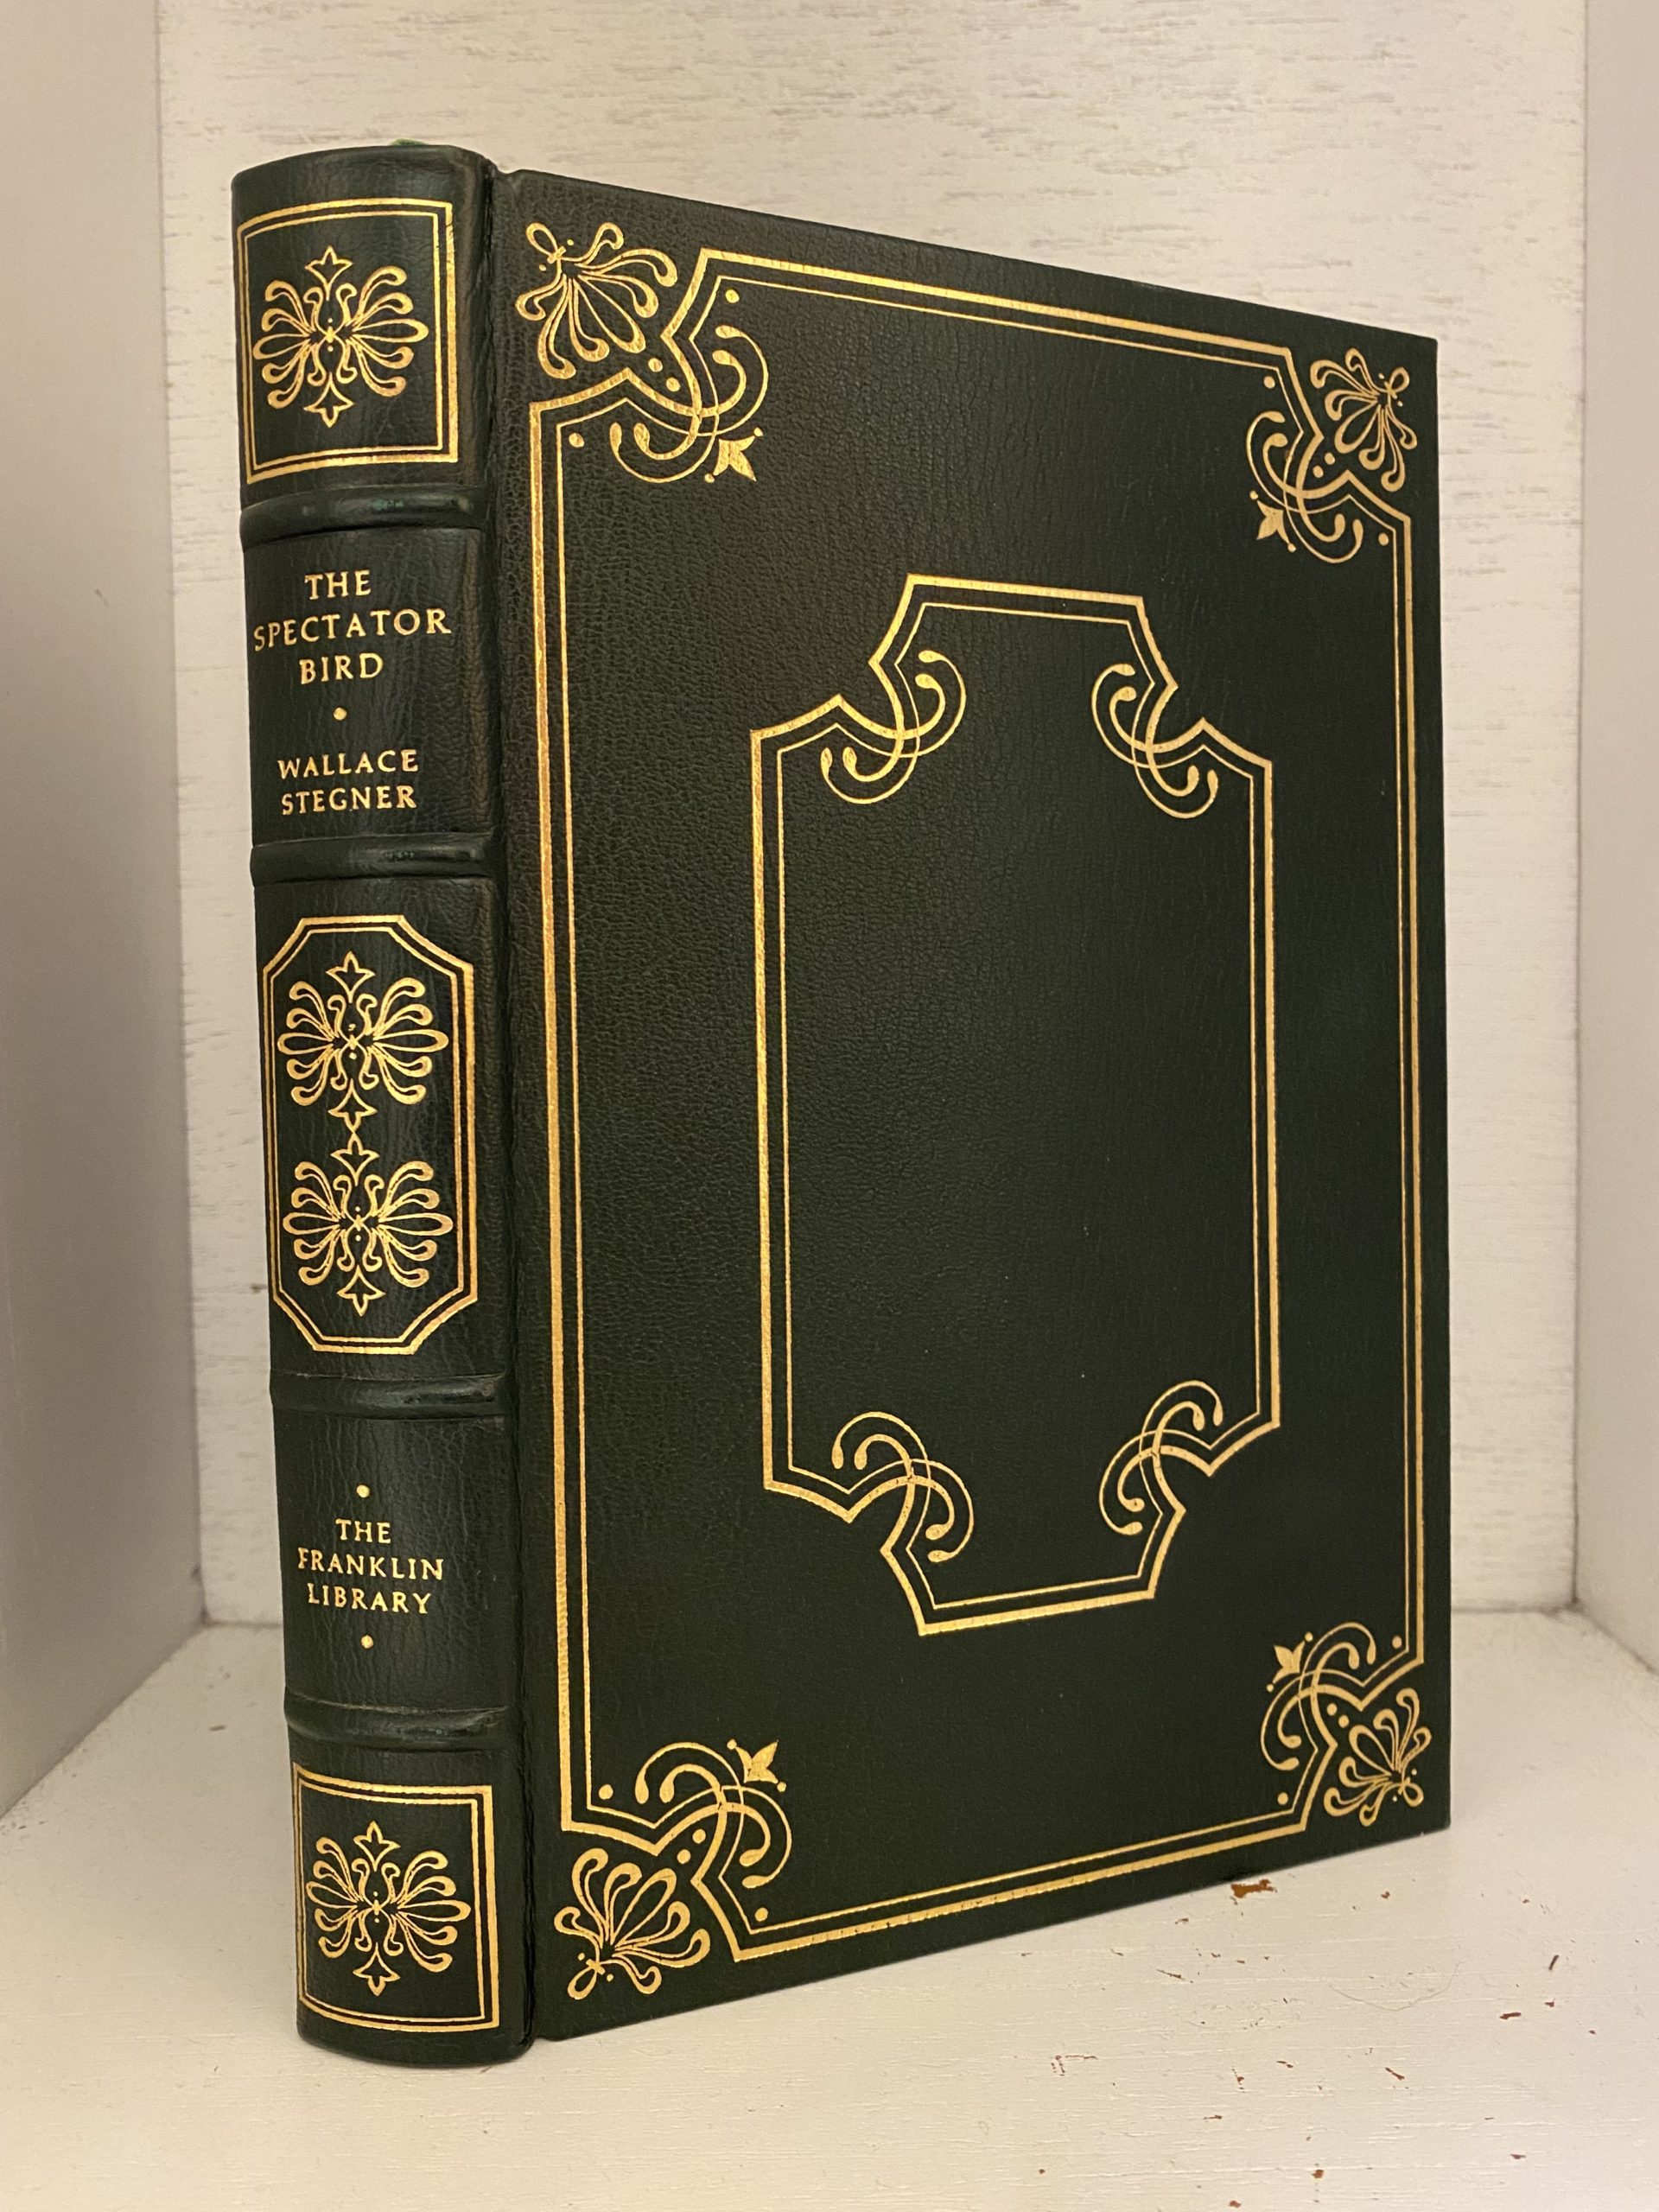 1976 - The Spectator Bird - Wallace Stegner - Leather-Bound Hardcover ...